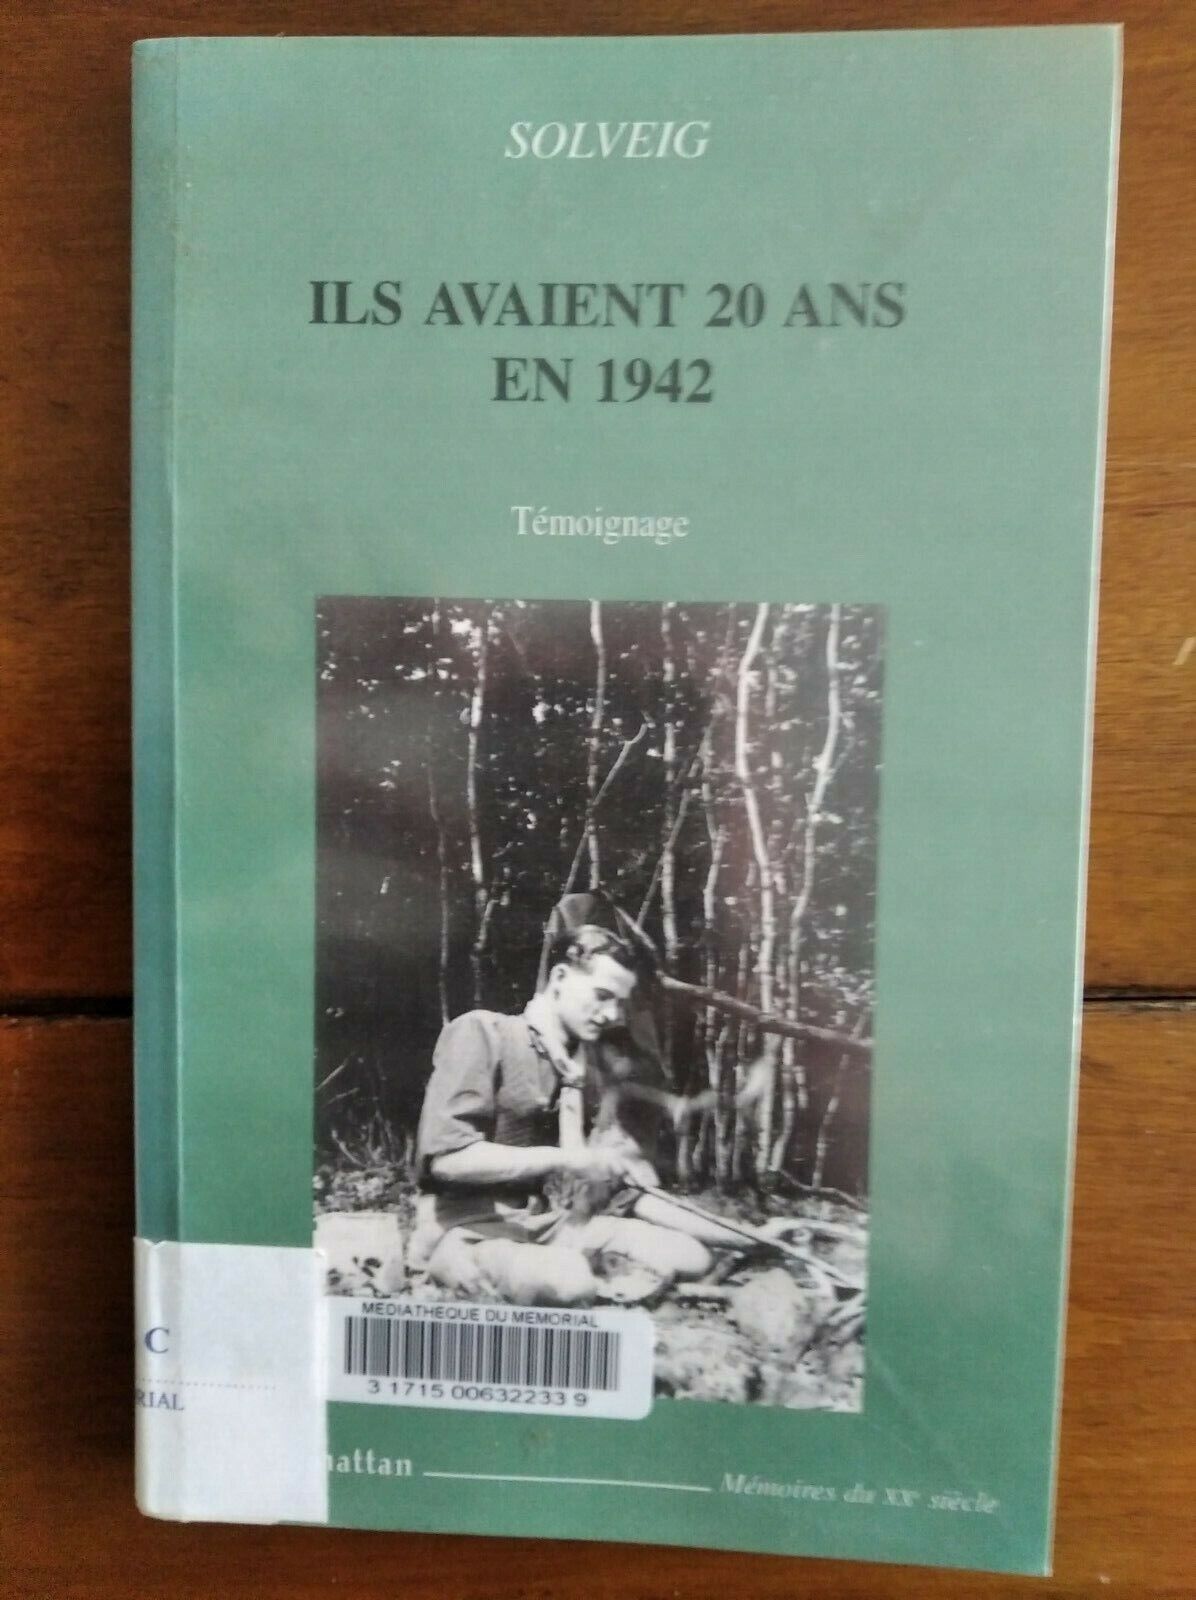 THEY HAD 20 YEARS OLD IN 1942 - Testimony by Solveig (M-Françoise Le Coze) - WW2